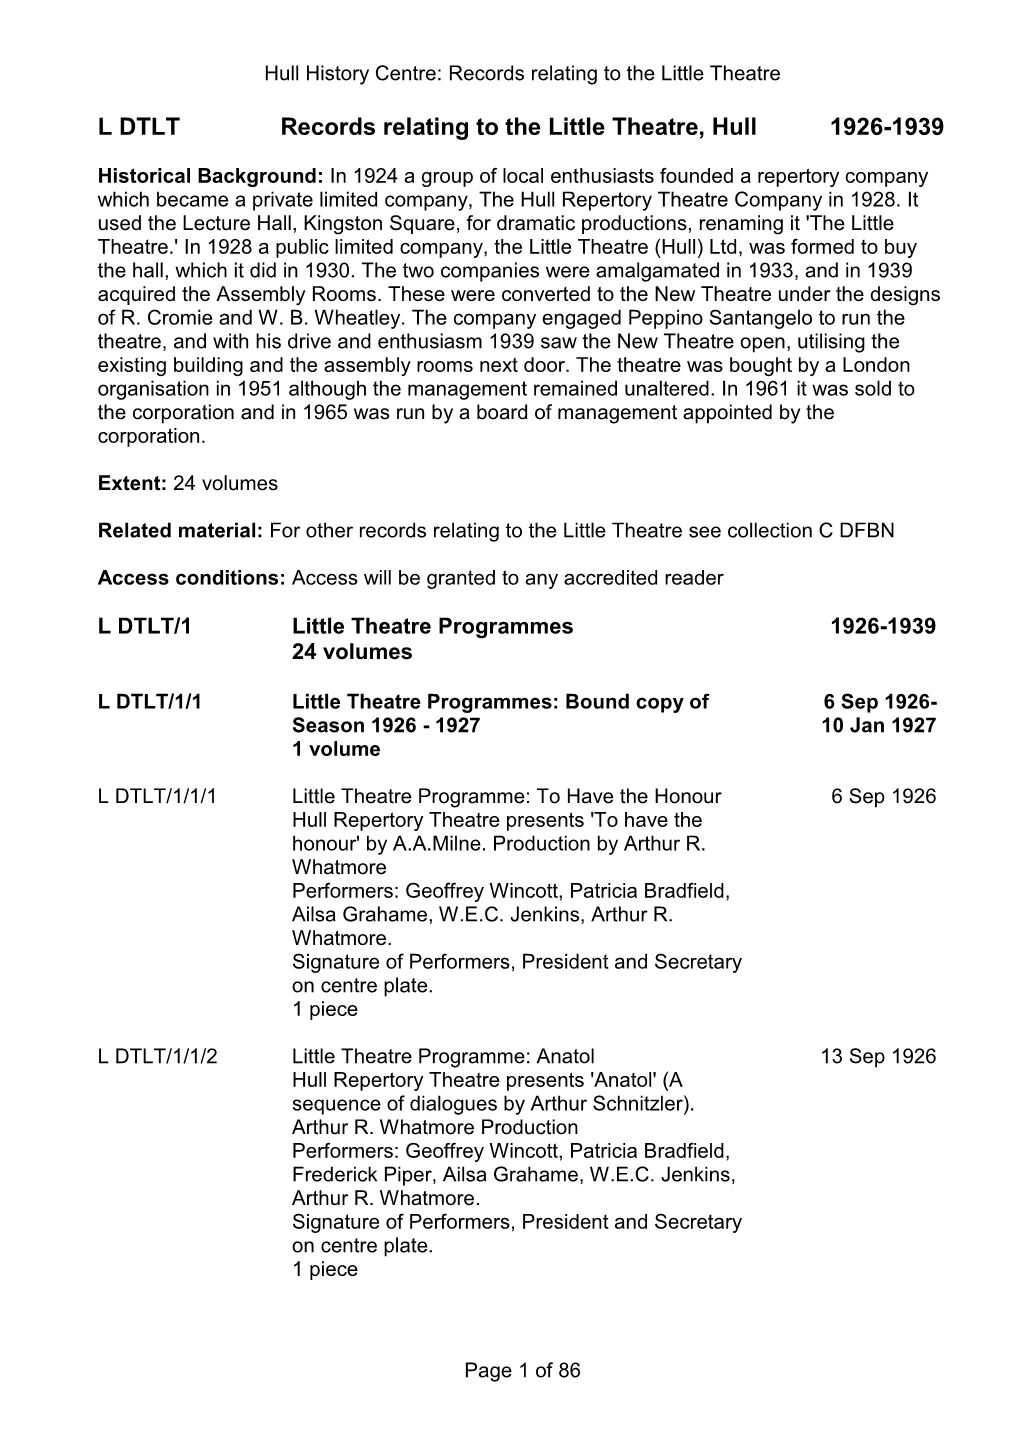 L DTLT Records Relating to the Little Theatre, Hull 1926-1939